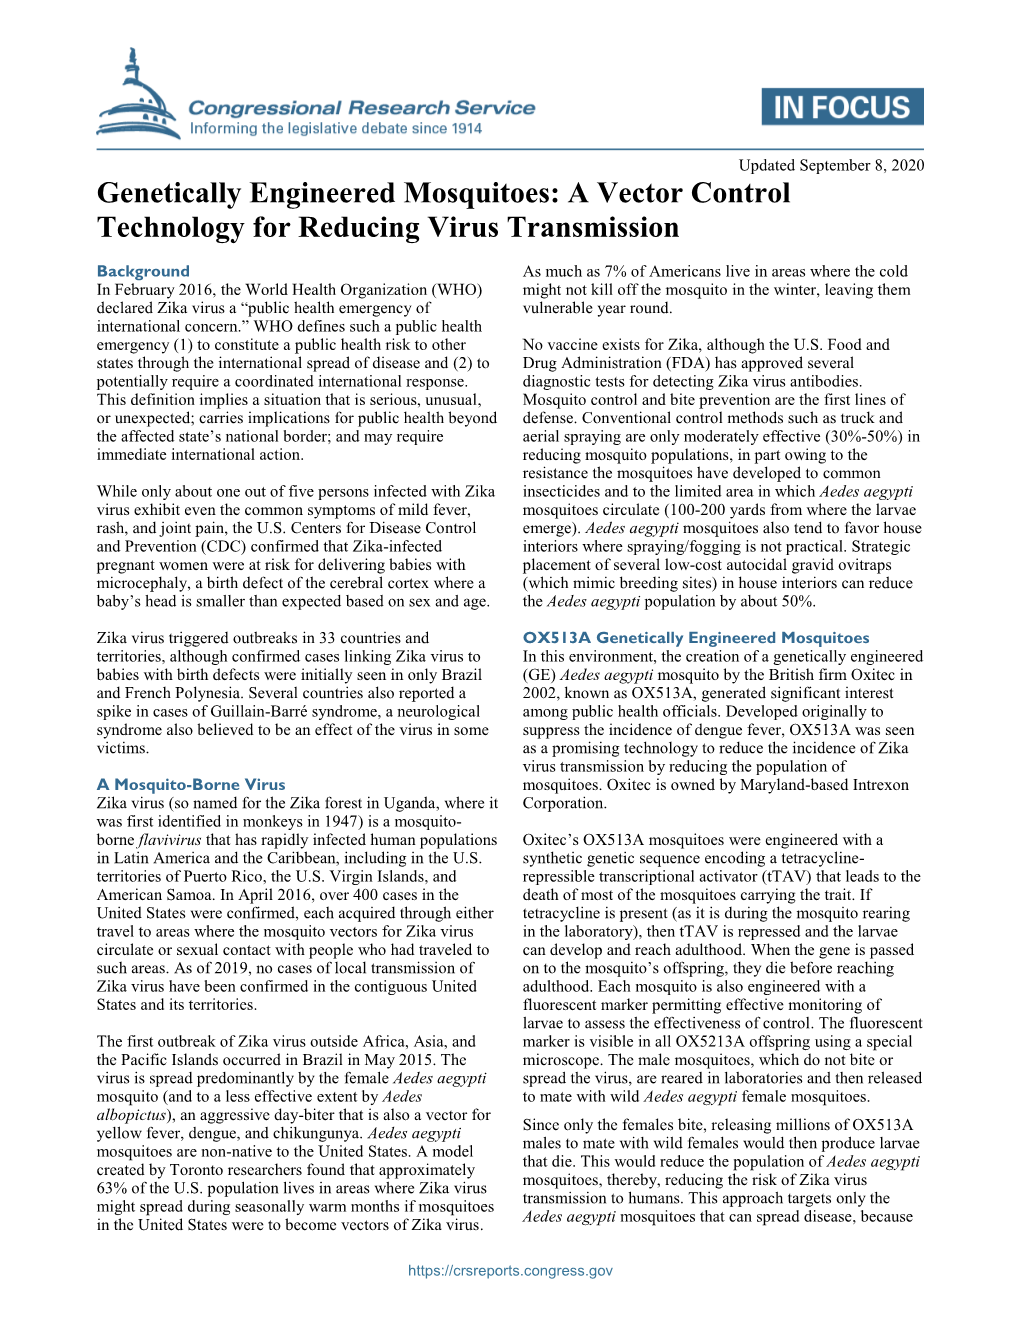 Genetically Engineered Mosquitoes: a Vector Control Technology for Reducing Virus Transmission